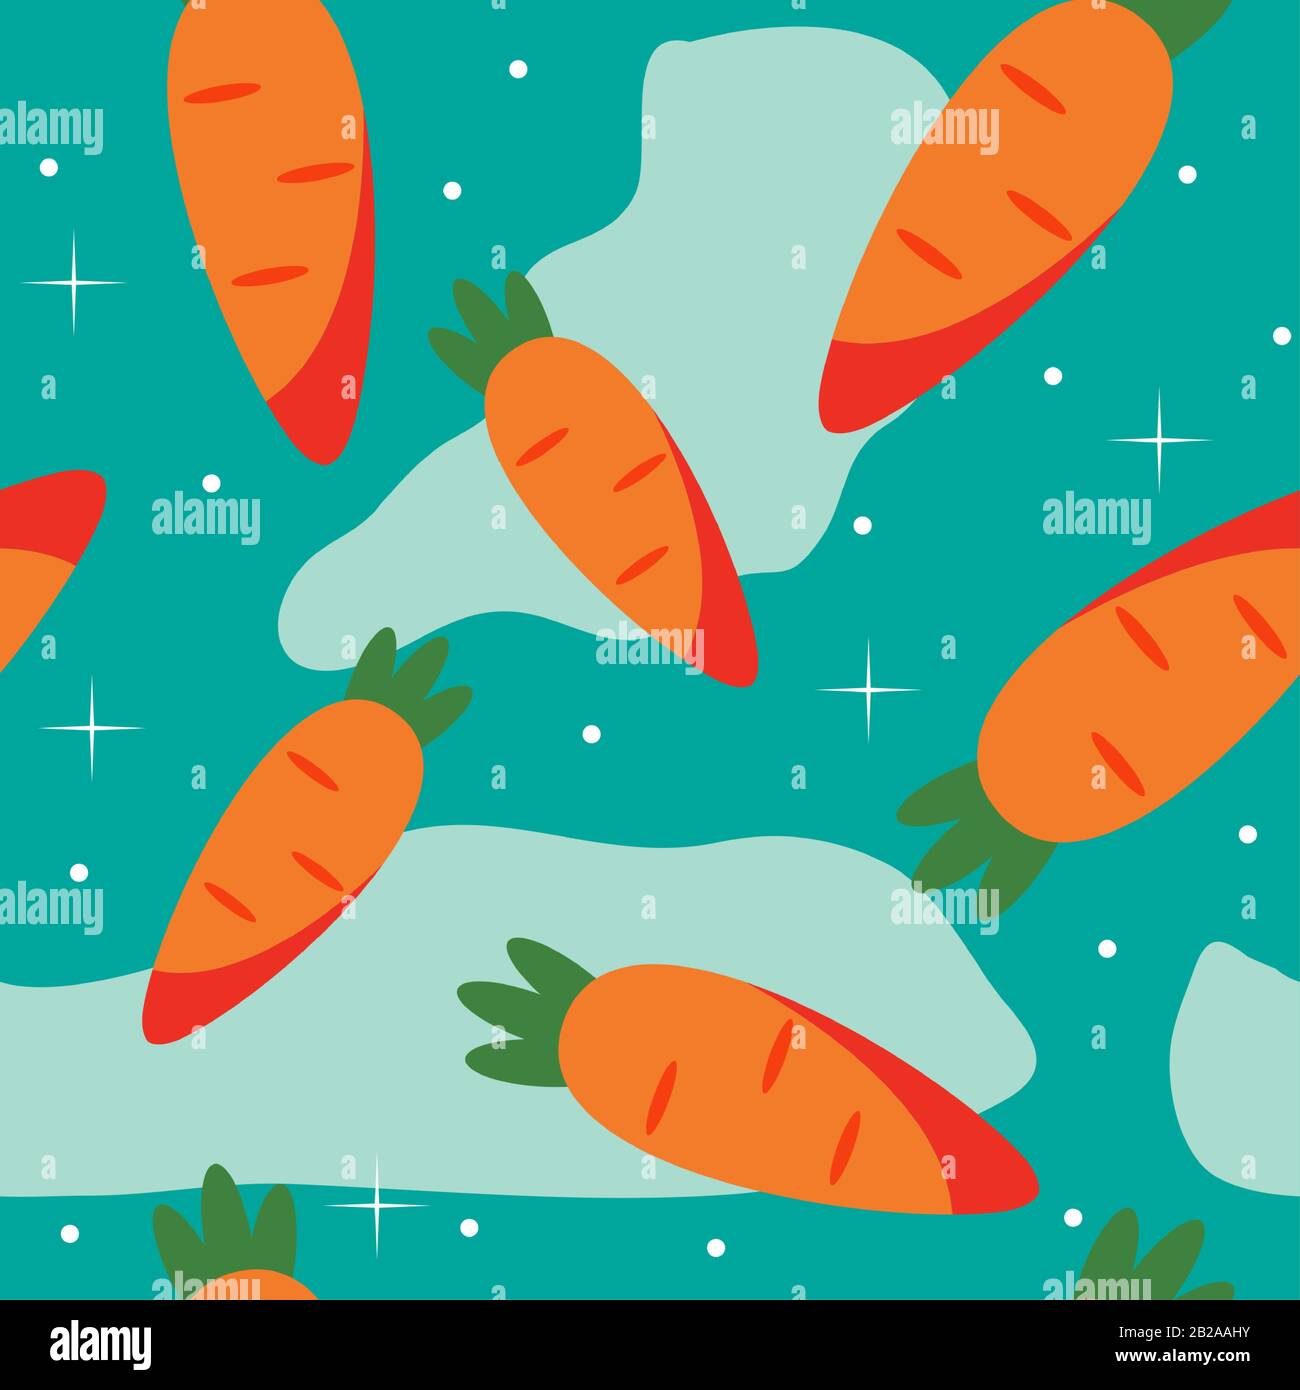 Abstract Carrot Seamless Pattern Background. Vector Illustration EPS10 Stock Vector